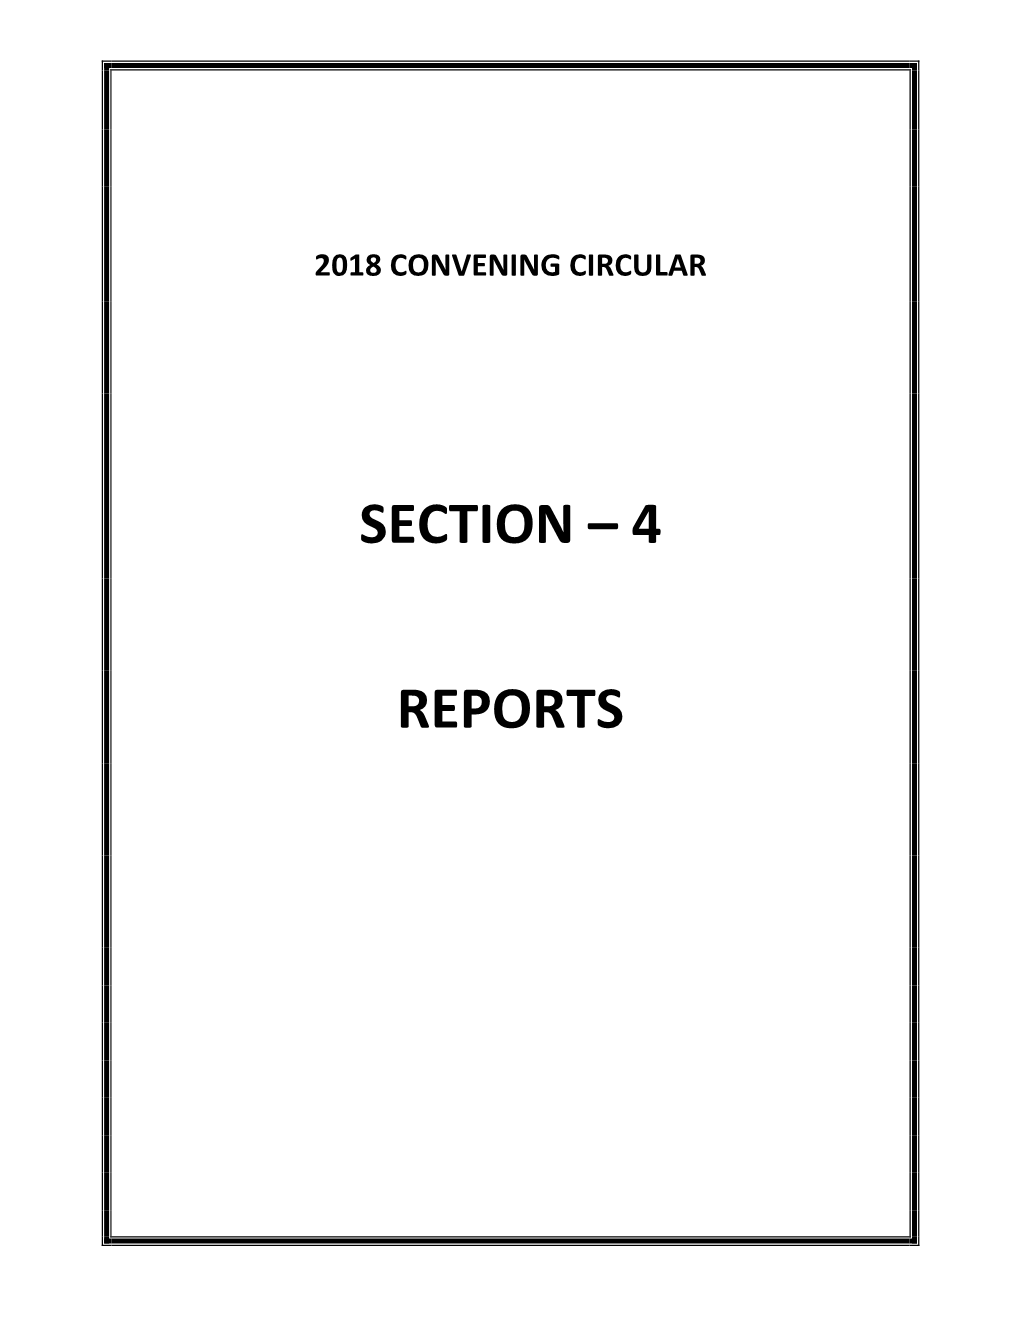 Section – 4 Reports